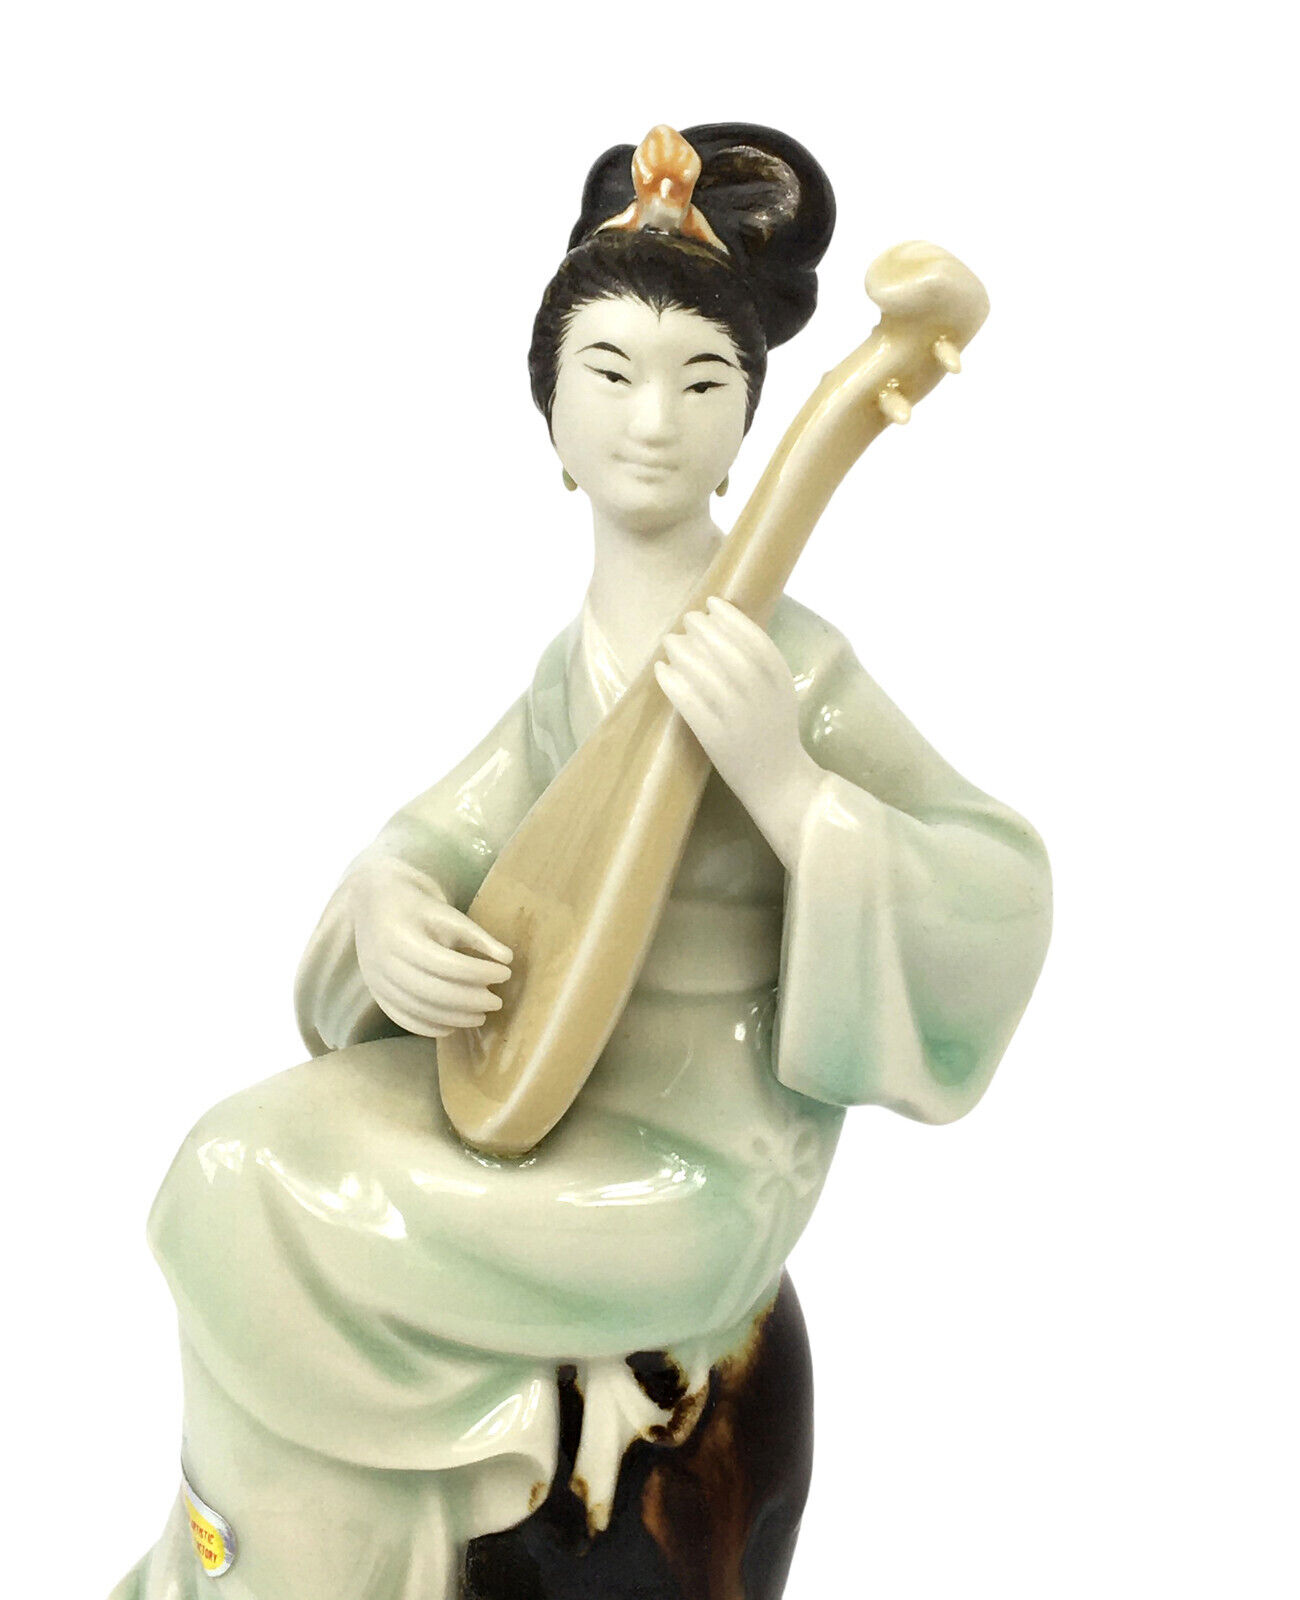 Vintage Shiwan Porcelain Chinese Woman Playing Pipa Musical Instrument Figurine